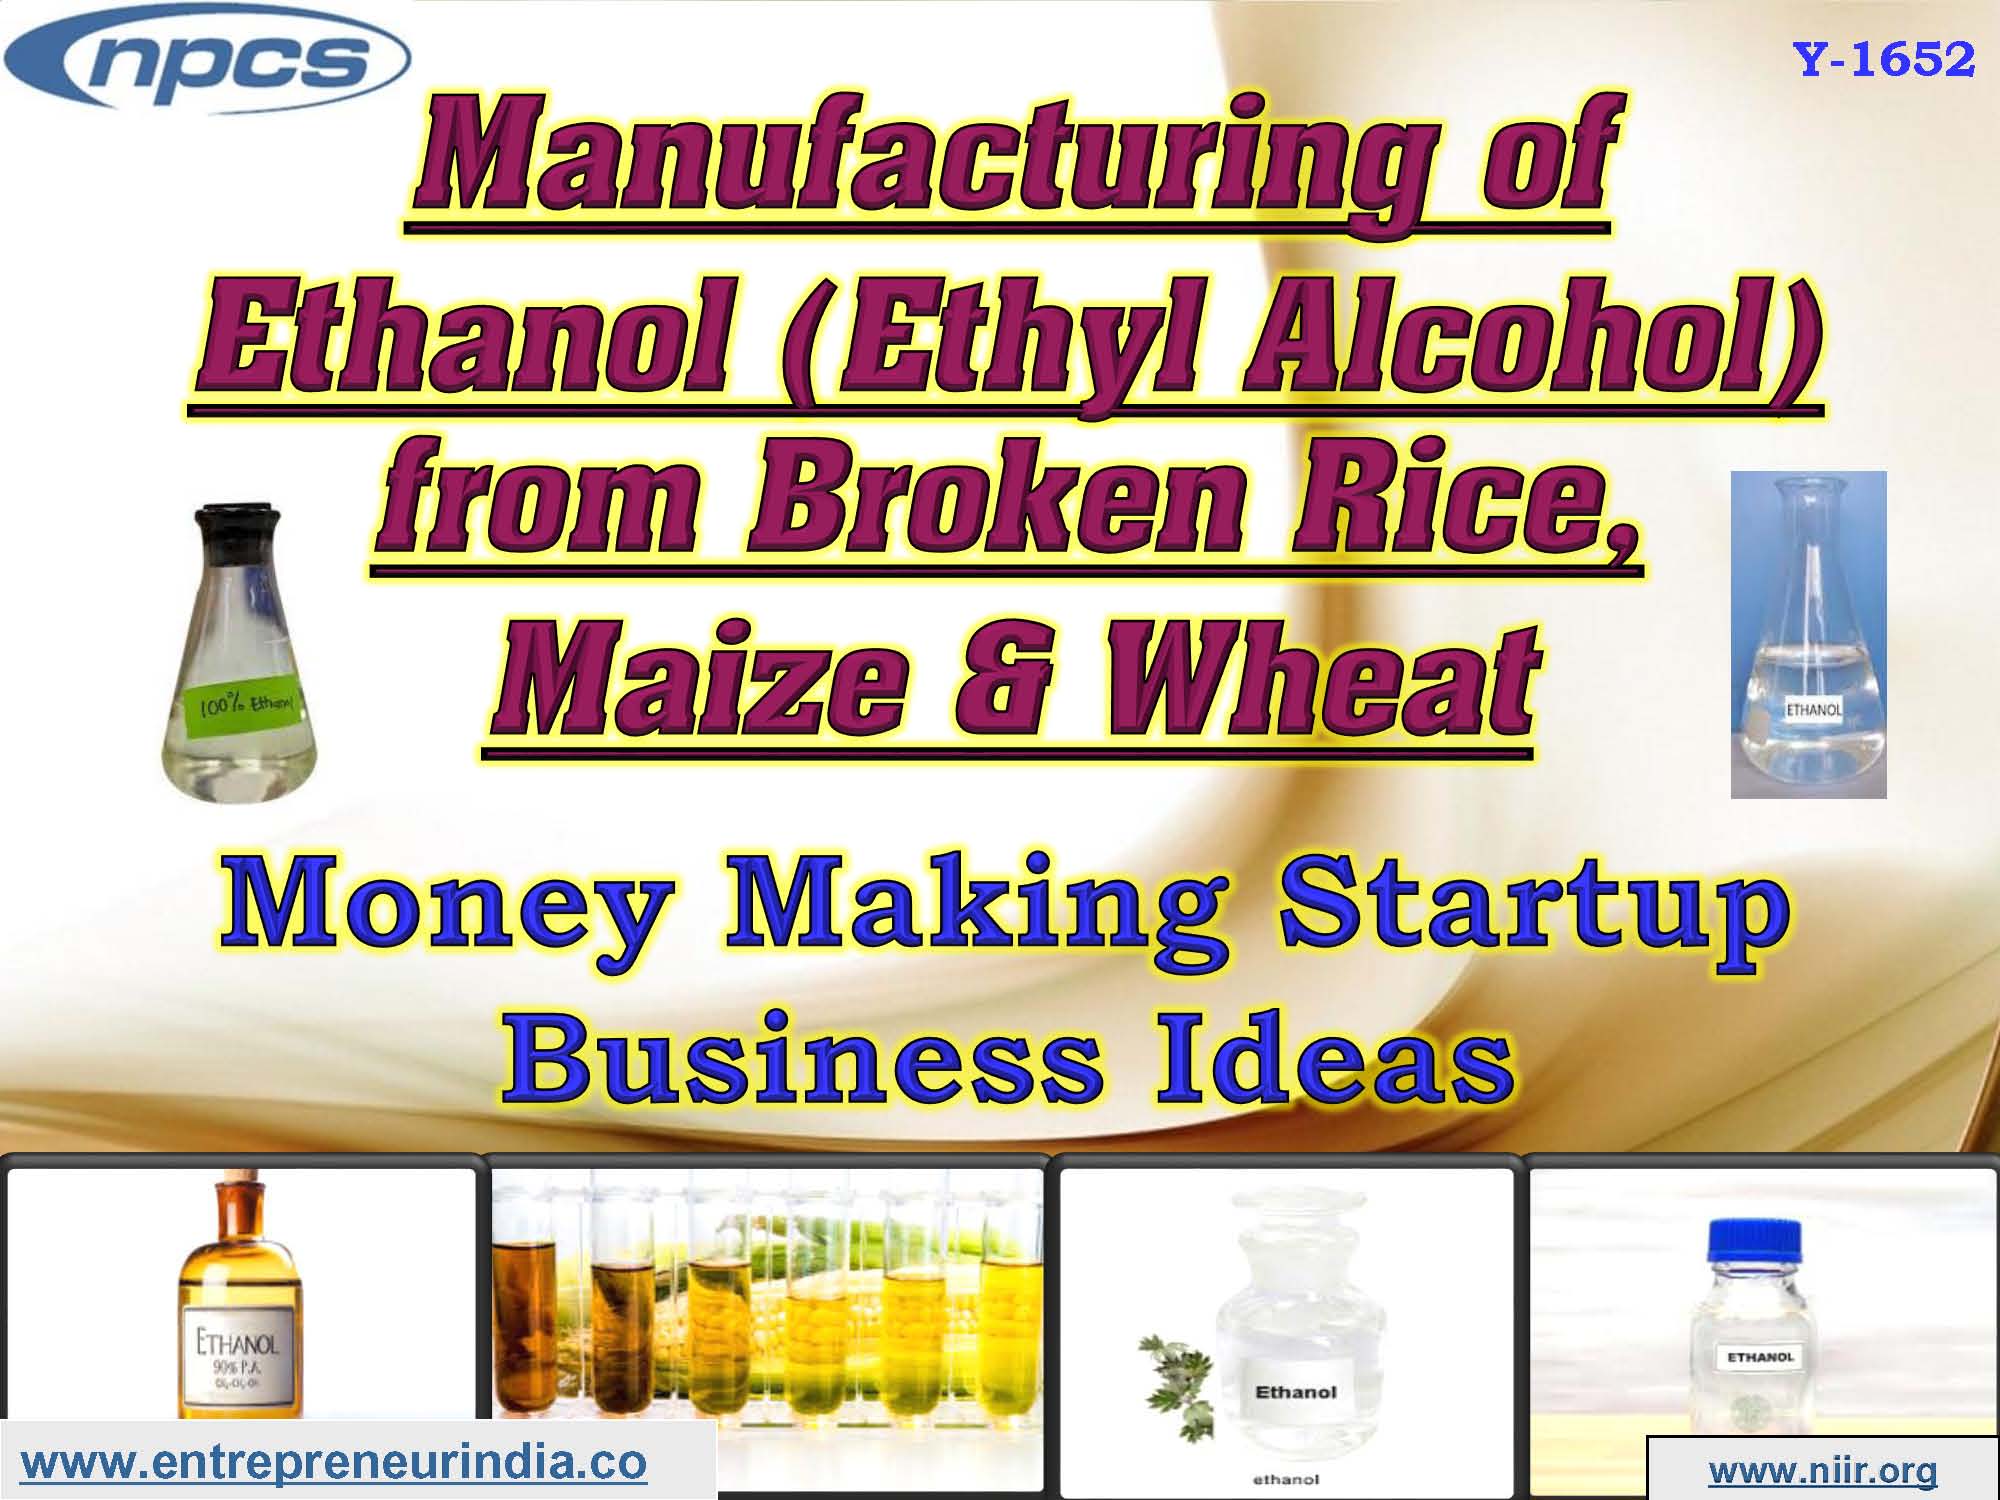 Manufacturing of Ethanol (Ethyl Alcohol) from Broken Rice, Maize & Wheat